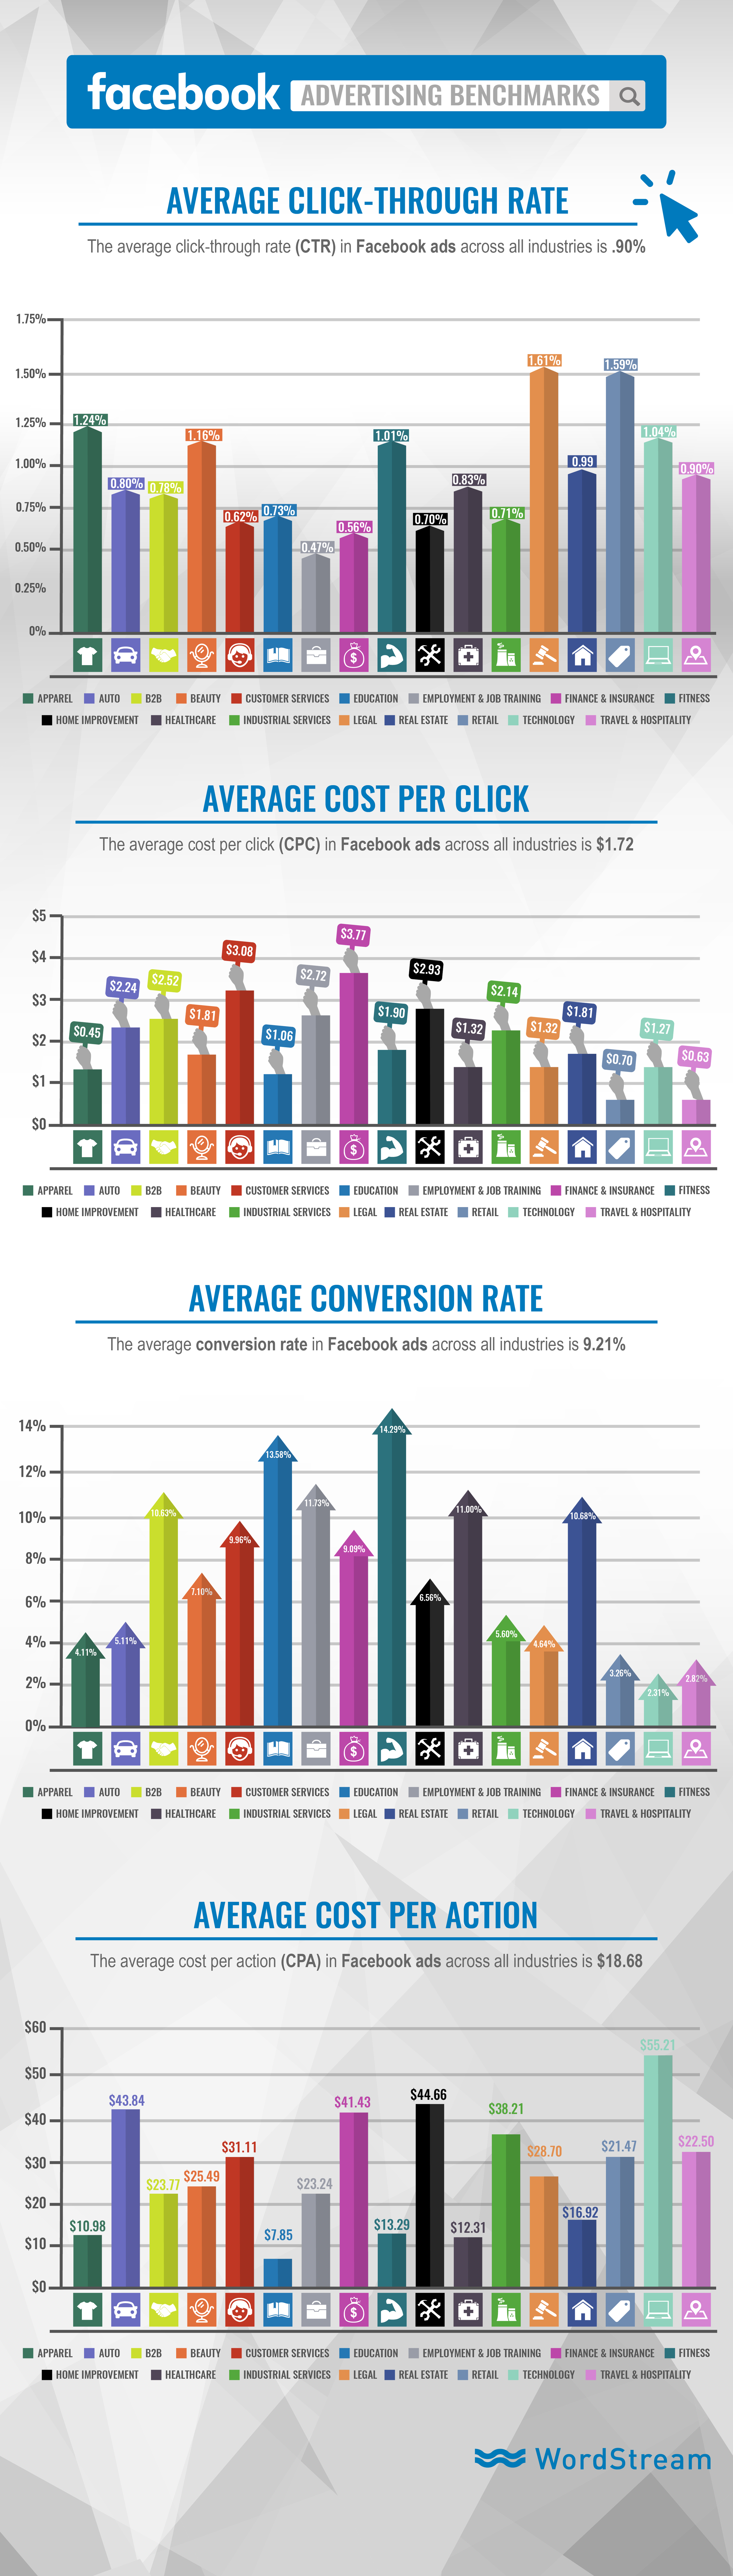 facebook ad performance benchmarks